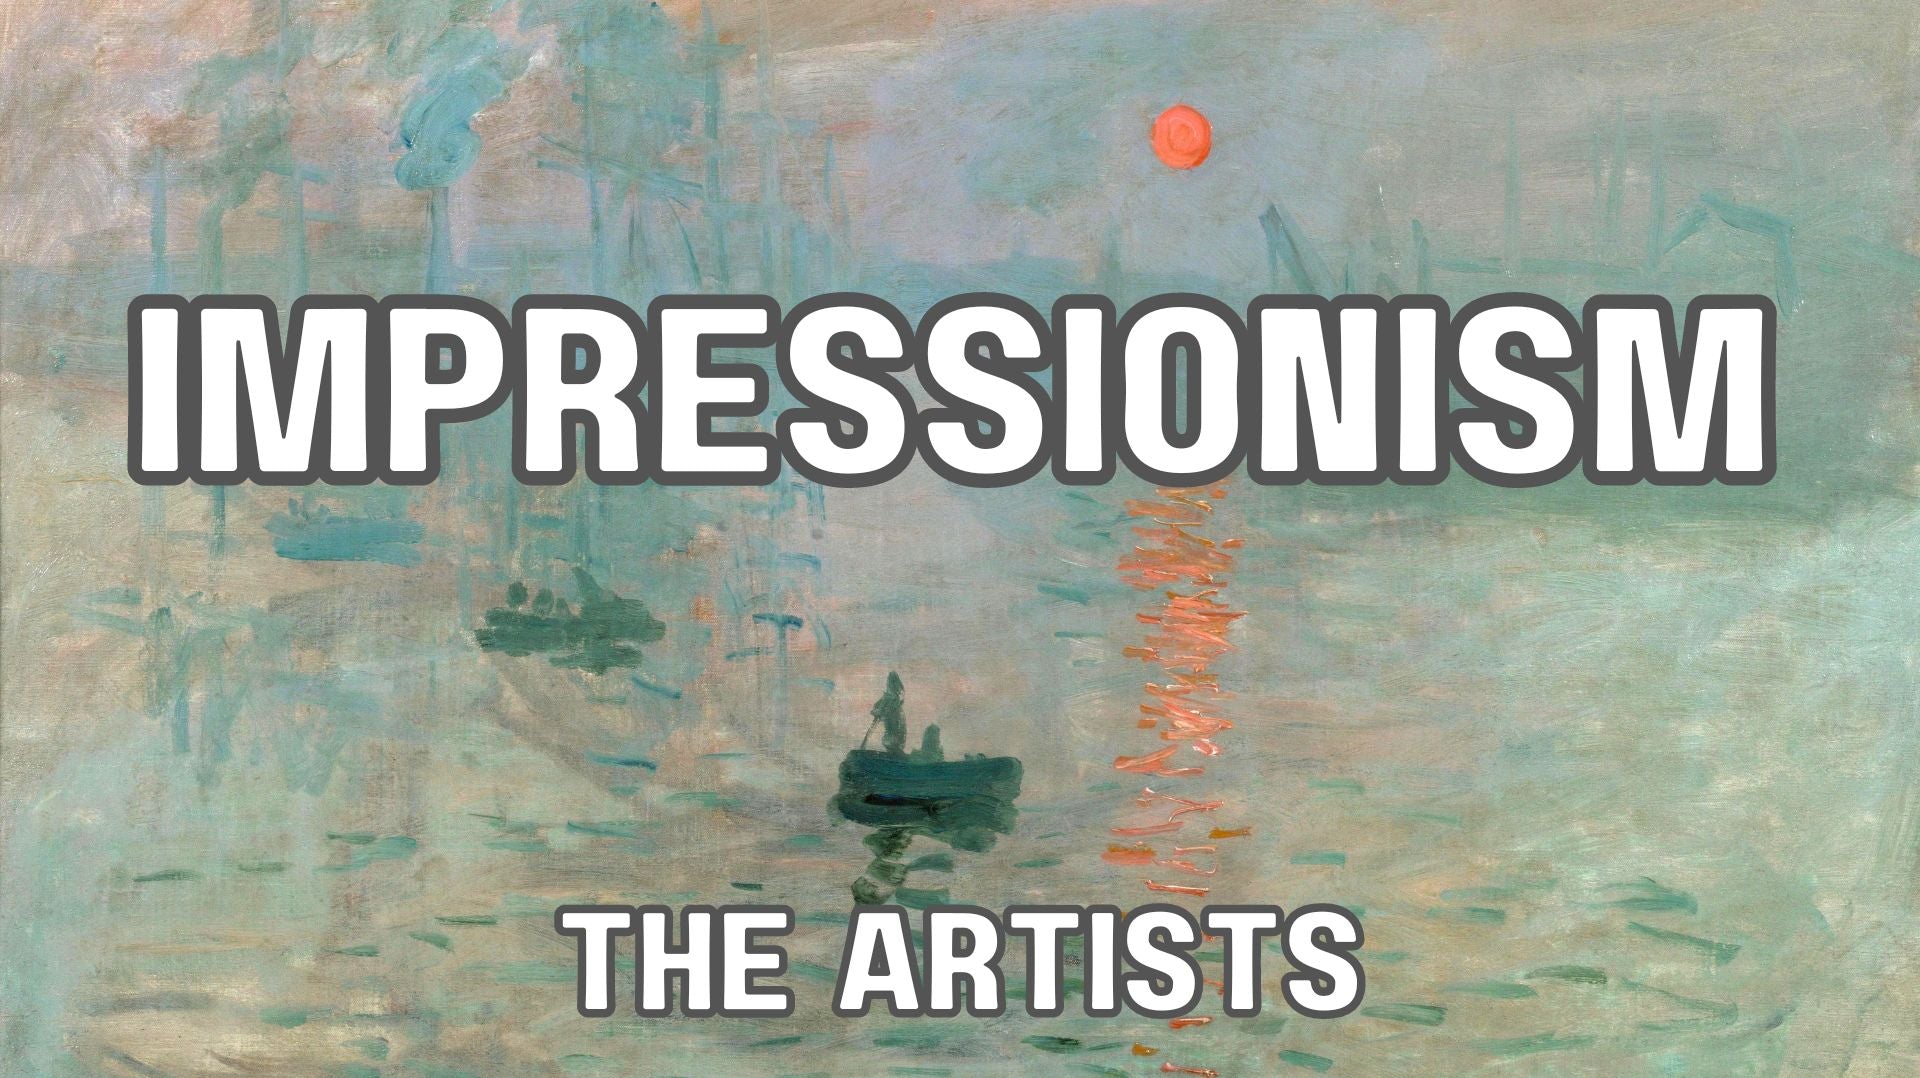 Impressionist Artists - The Complete List